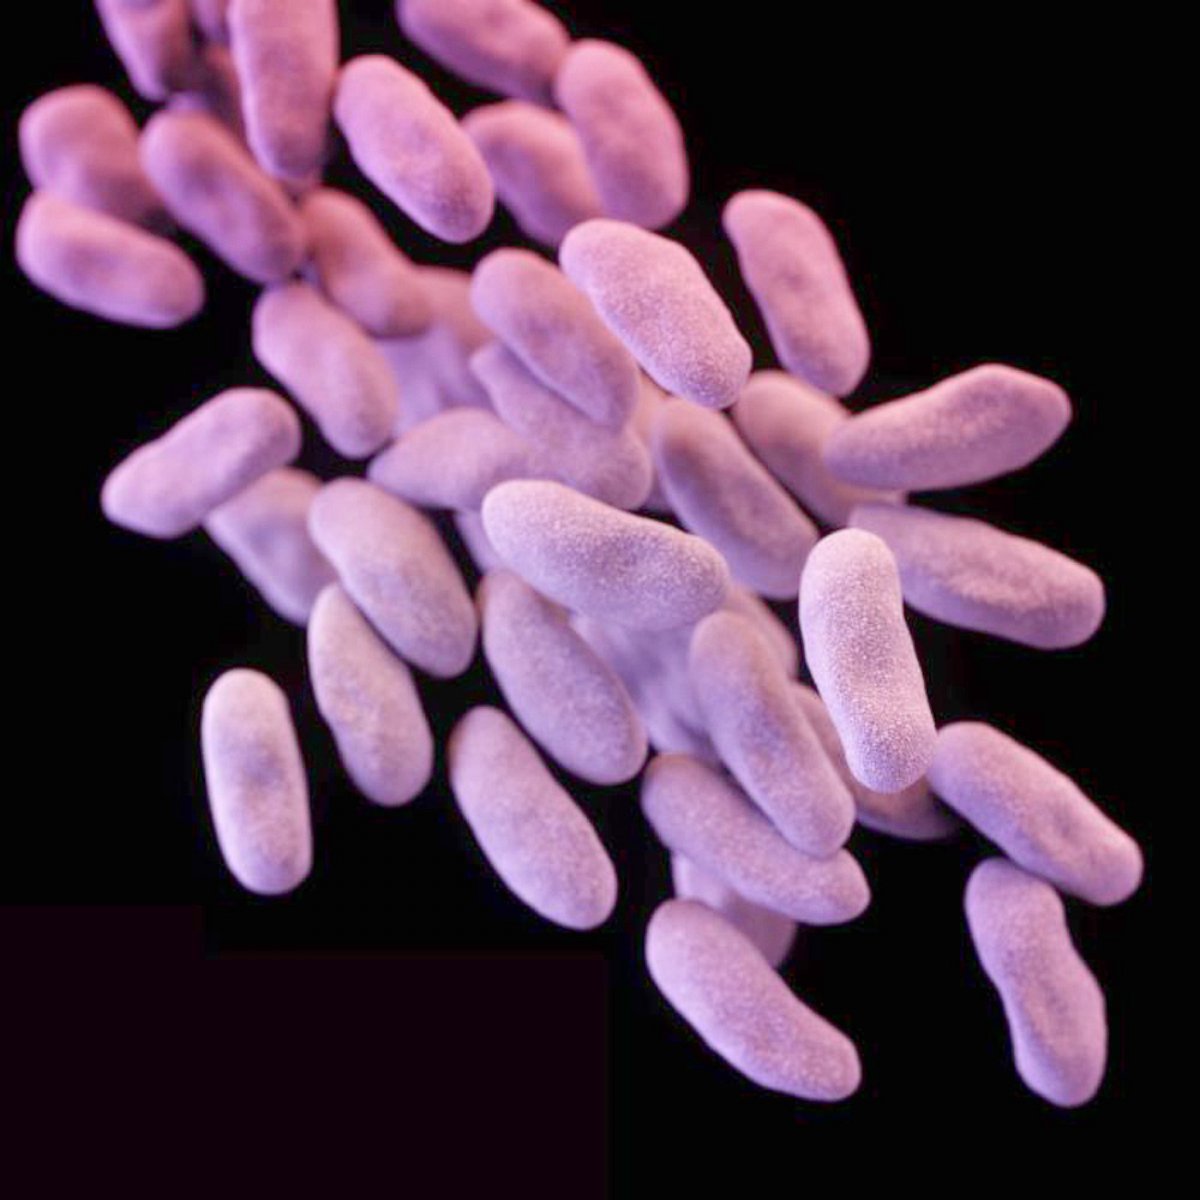 PHOTO: Carbapenem-resistant Enterobacteriaceae (CRE) bacteria is pictured in this medical illustration provided by the Centre of Disease Control and Prevention (CDC).